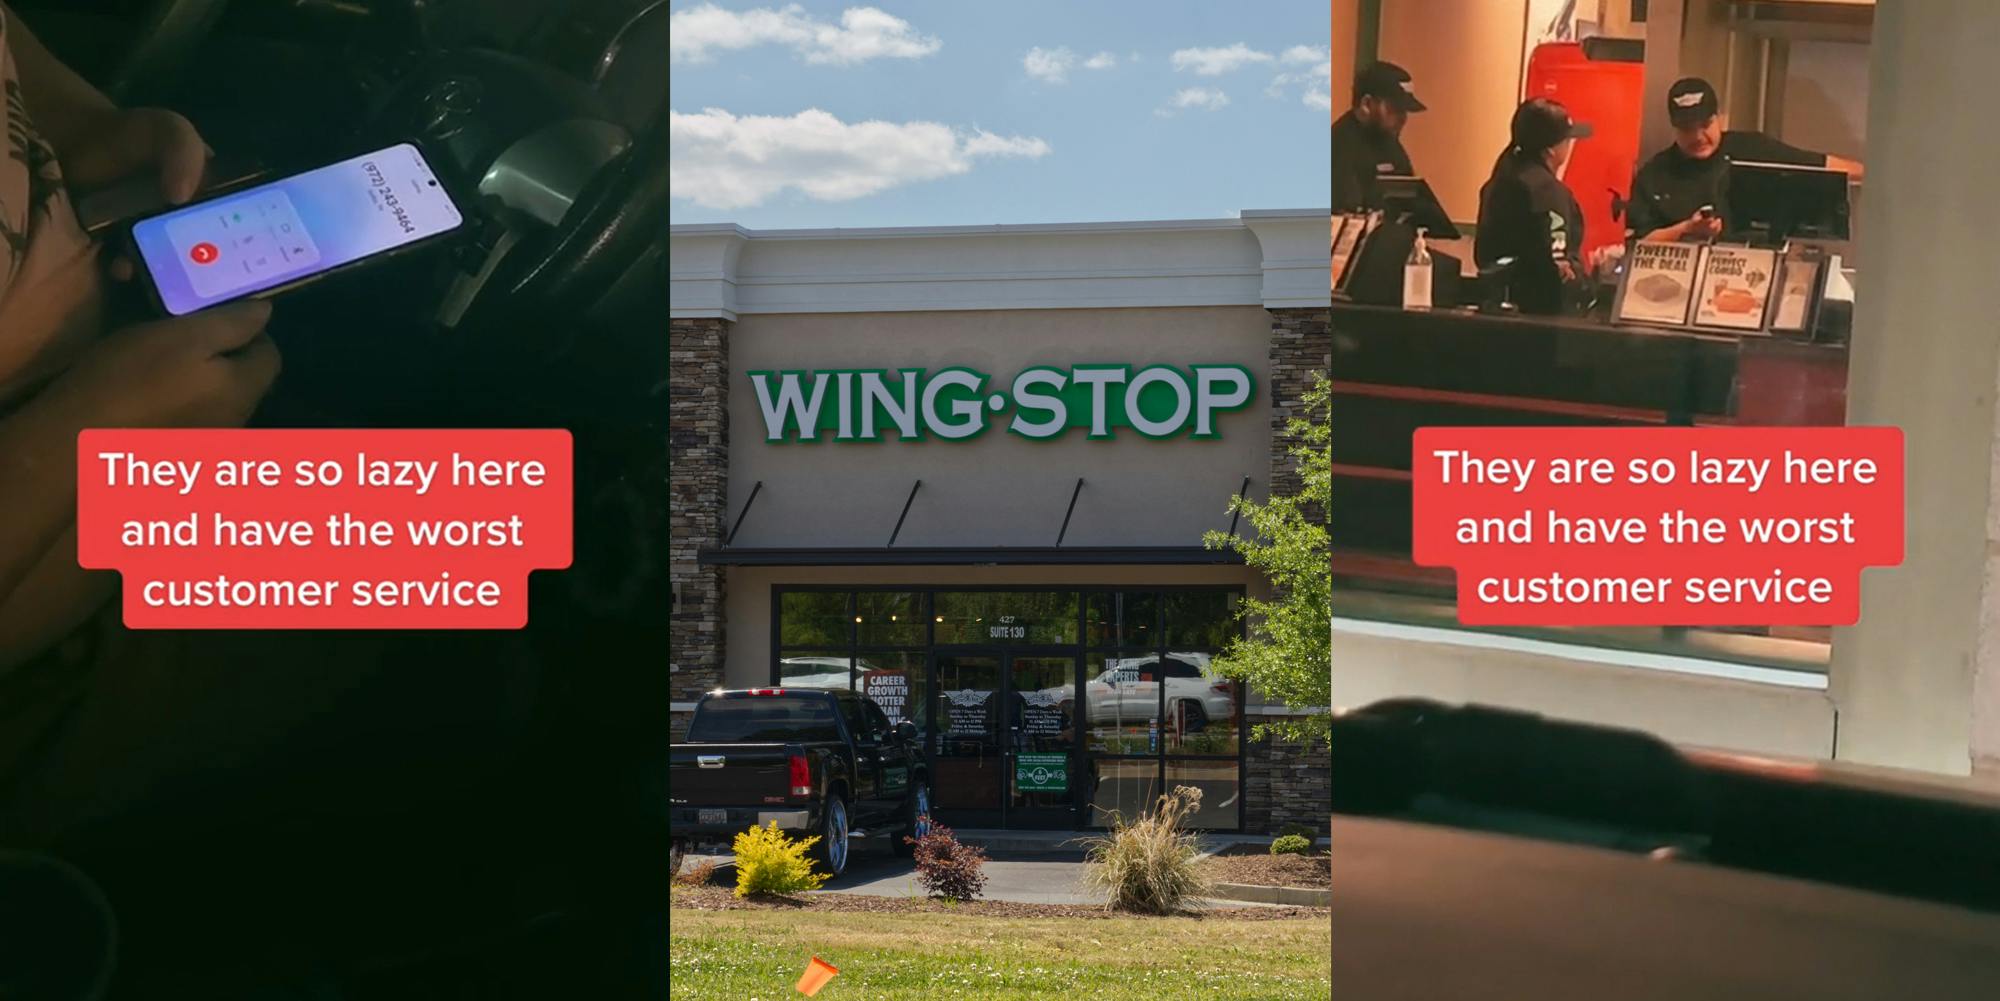 woman holding phone in car calling Wing Stop with caption "They are so lazy here and have the worst customer service" (l) Wing Stop sign on building with blue sky (c) Wing stop workers looking at phone with caption "They are so lazy here and have the worst customer service" (r)